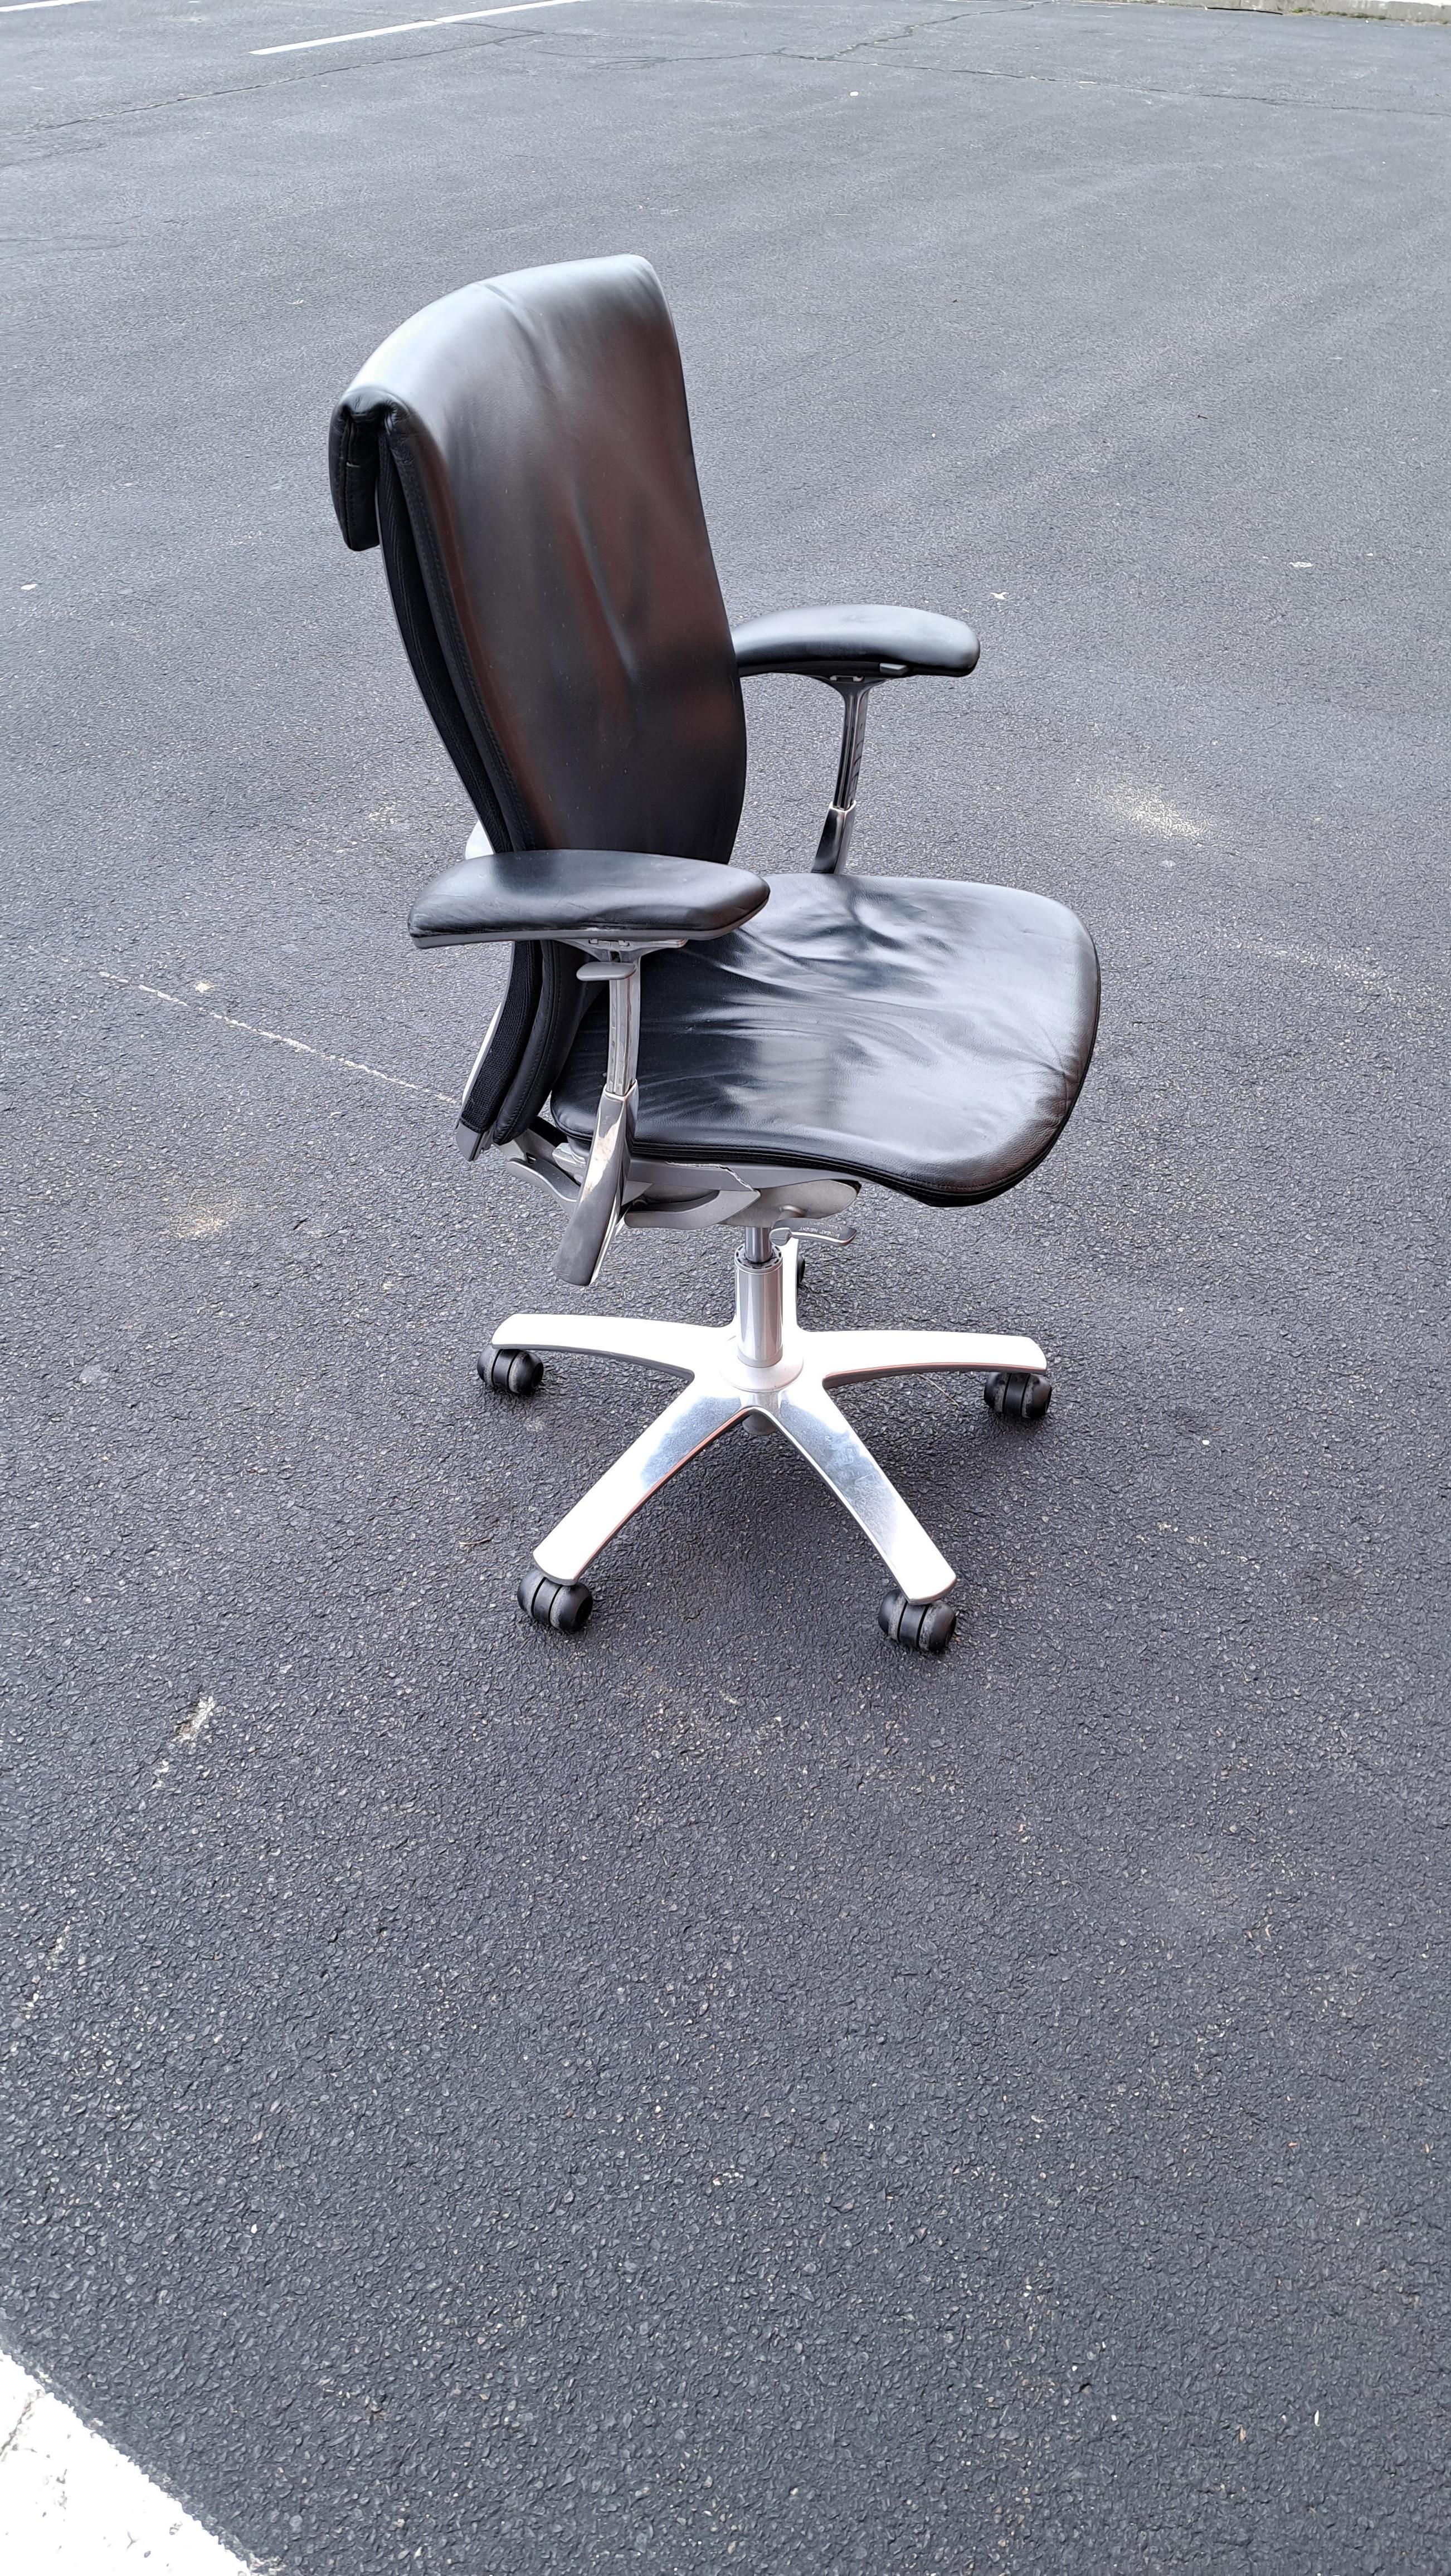 Knoll Life fully adjustable office chair. Aluminum and black leather chair with casters and Knoll stamp.